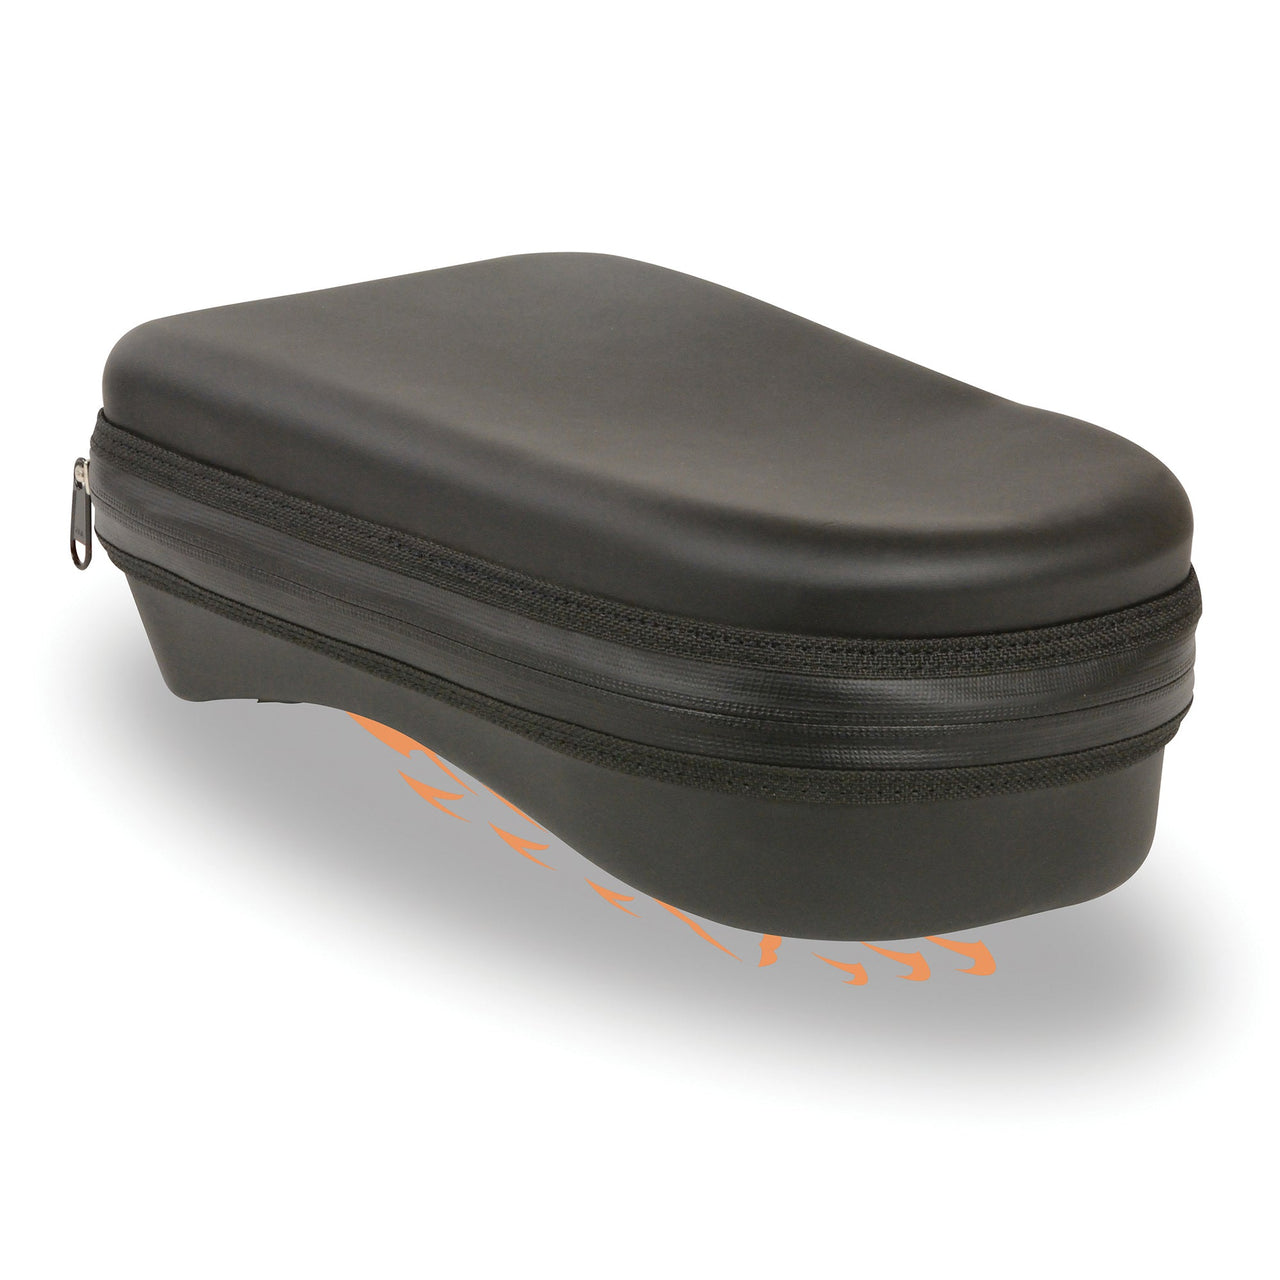 Small Waterproof Suction Cup Storage Pouch - HighwayLeather